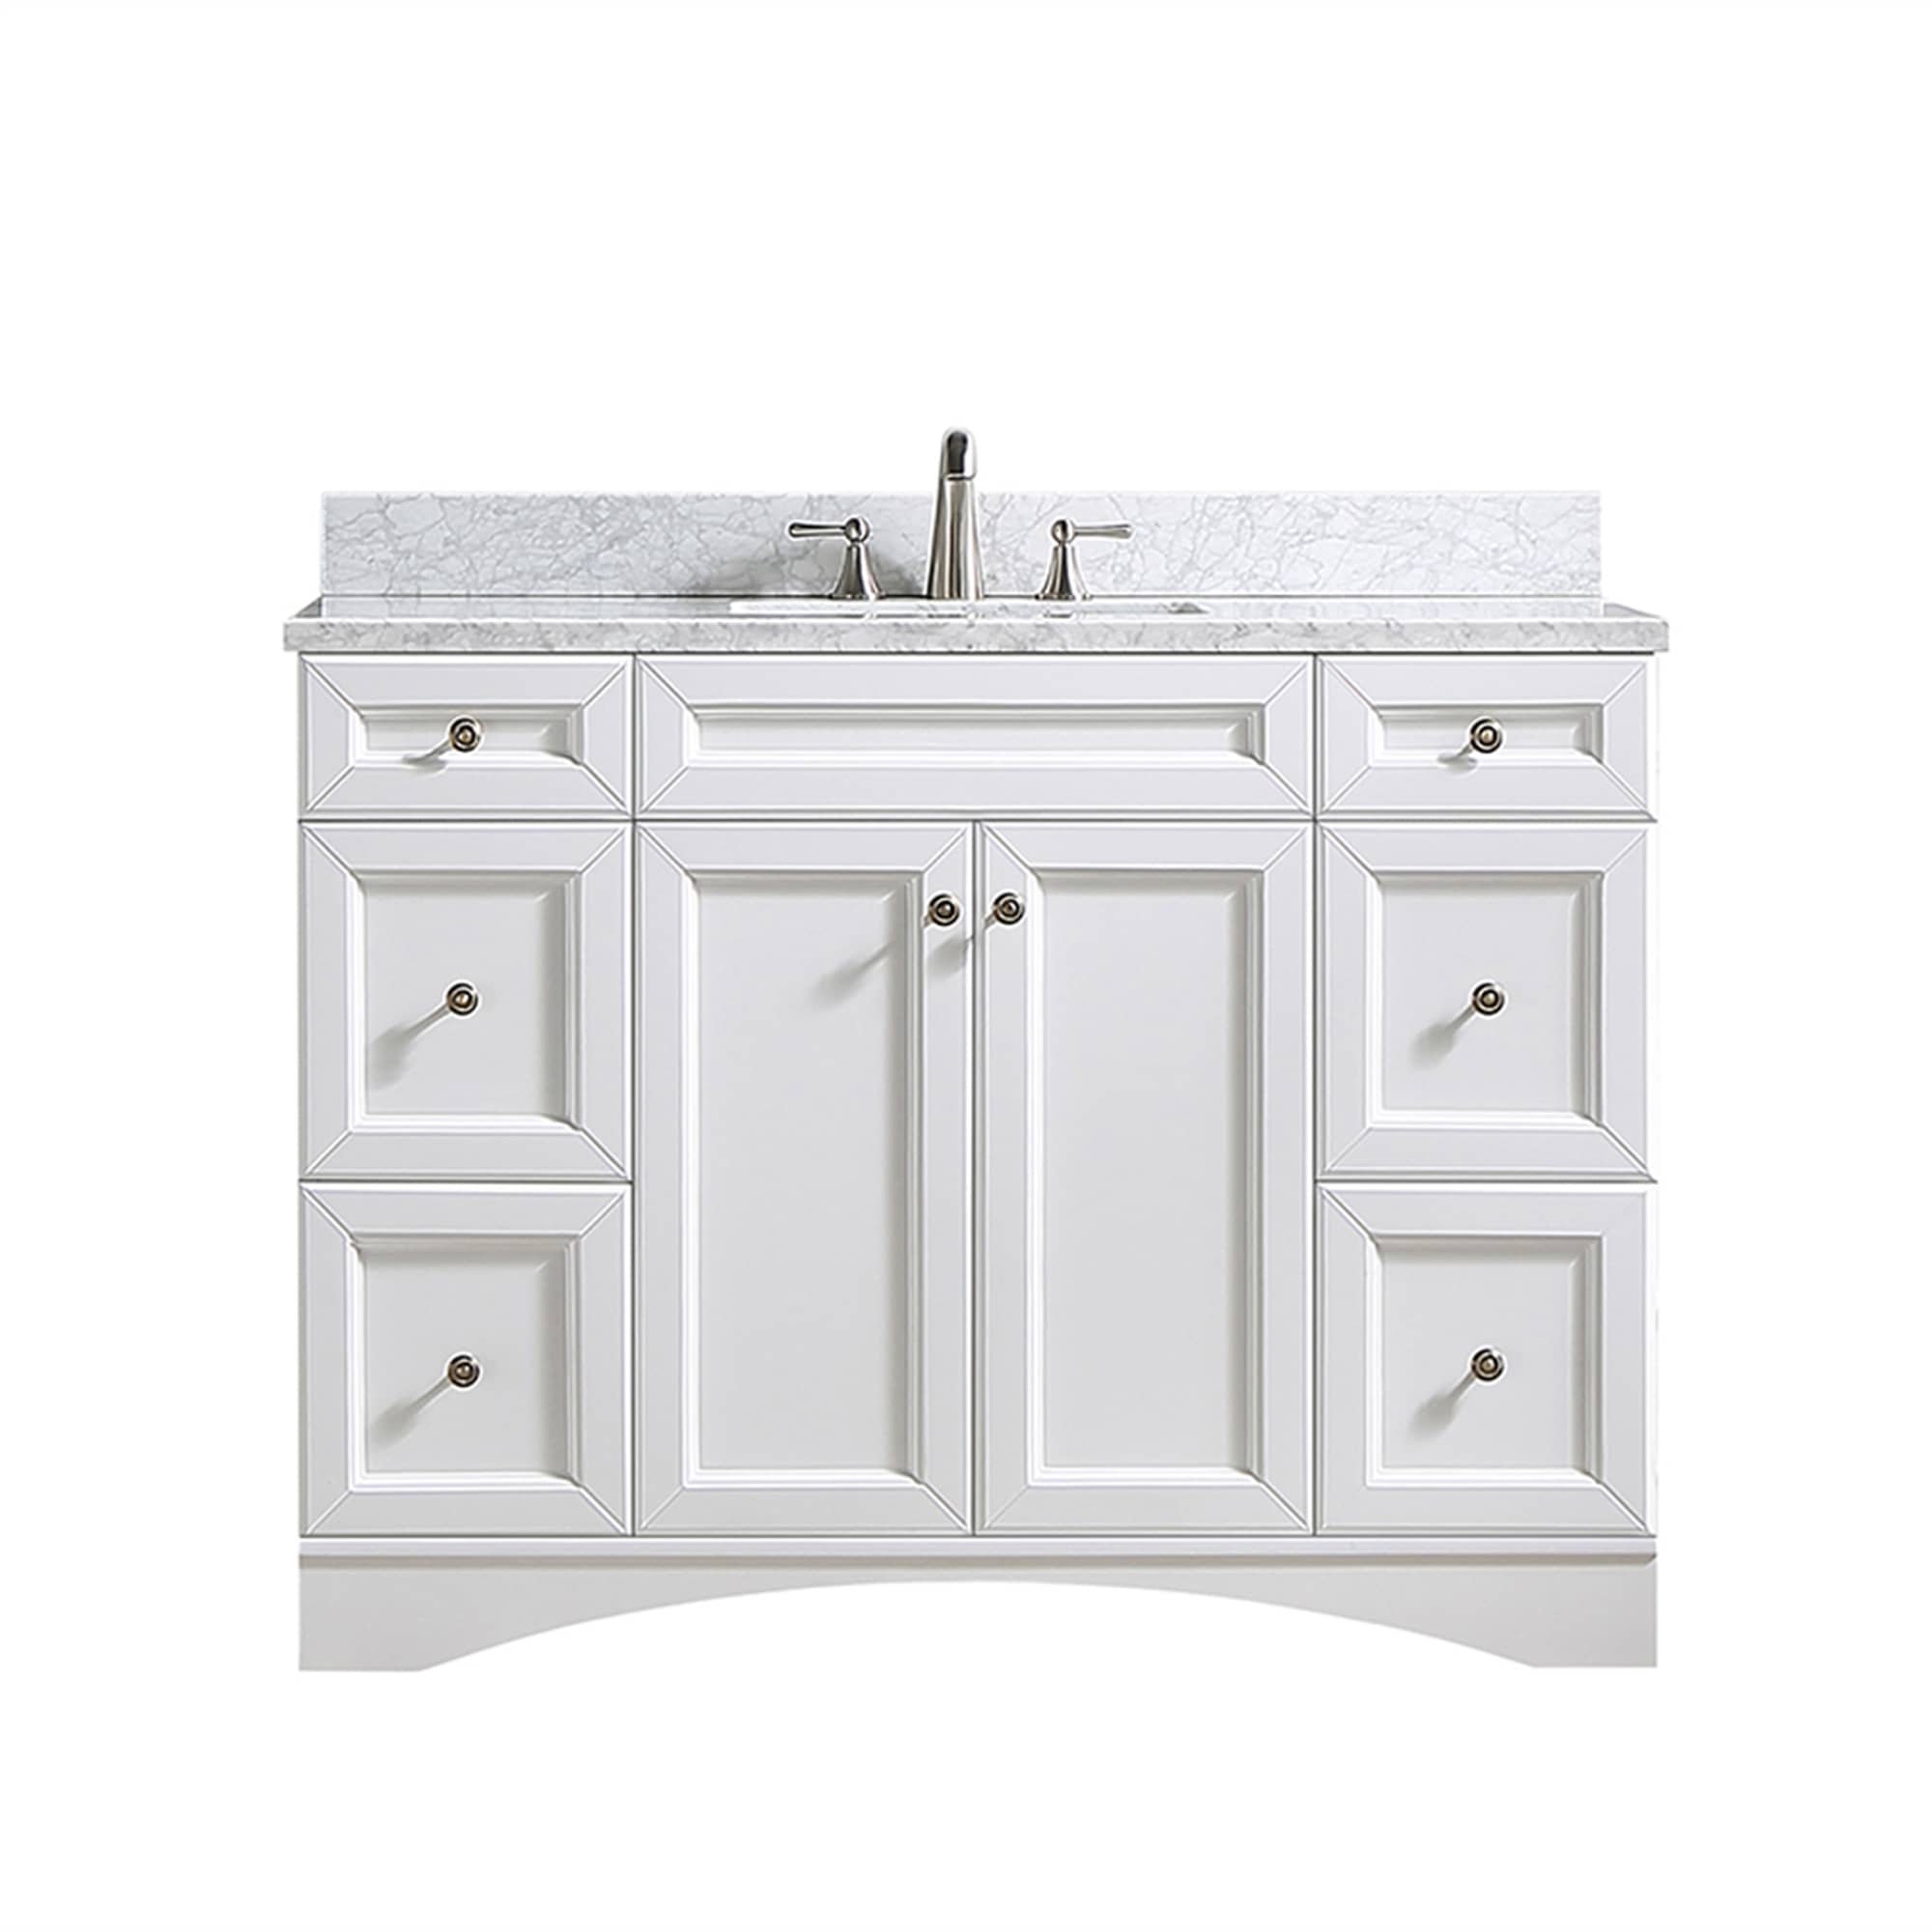 CASAINC 48 Inch Bath Vanity in White with White Top and Basin (48W x 22D x 35.4"H)